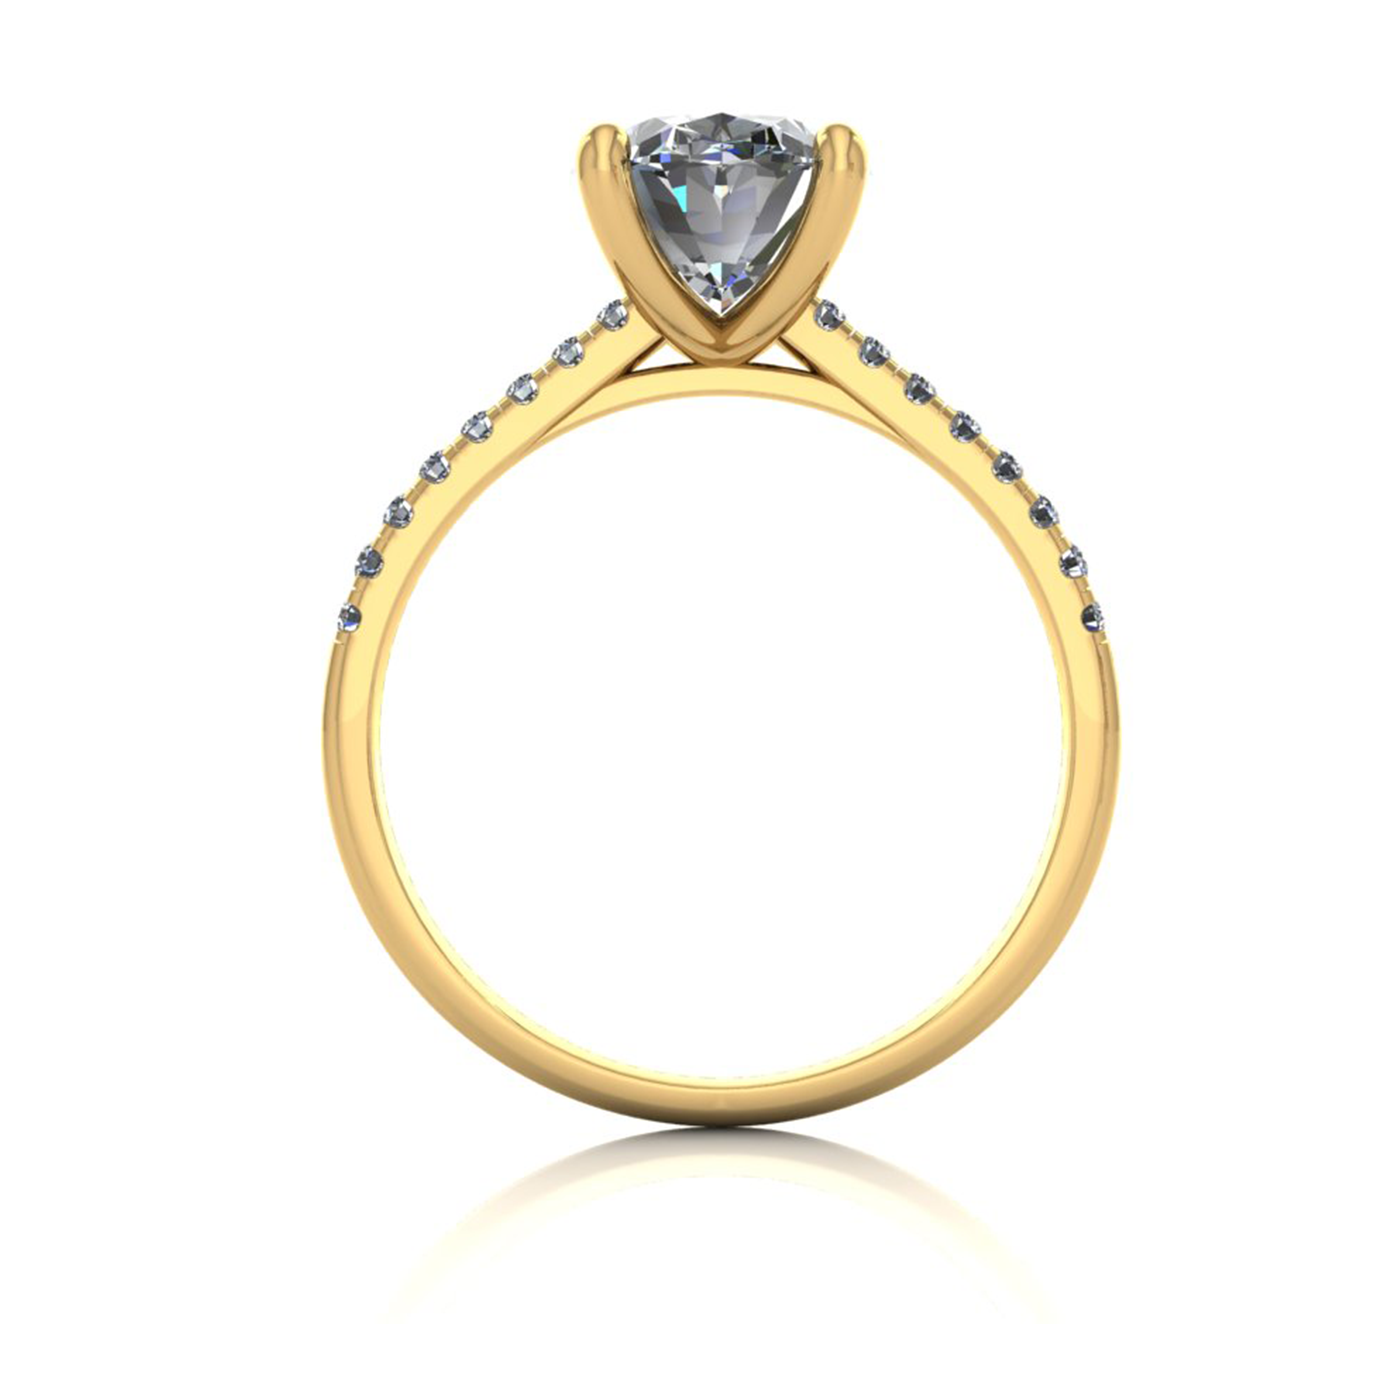 18k yellow gold  2,00 ct 4 prongs oval cut diamond engagement ring with whisper thin pavÉ set band Photos & images